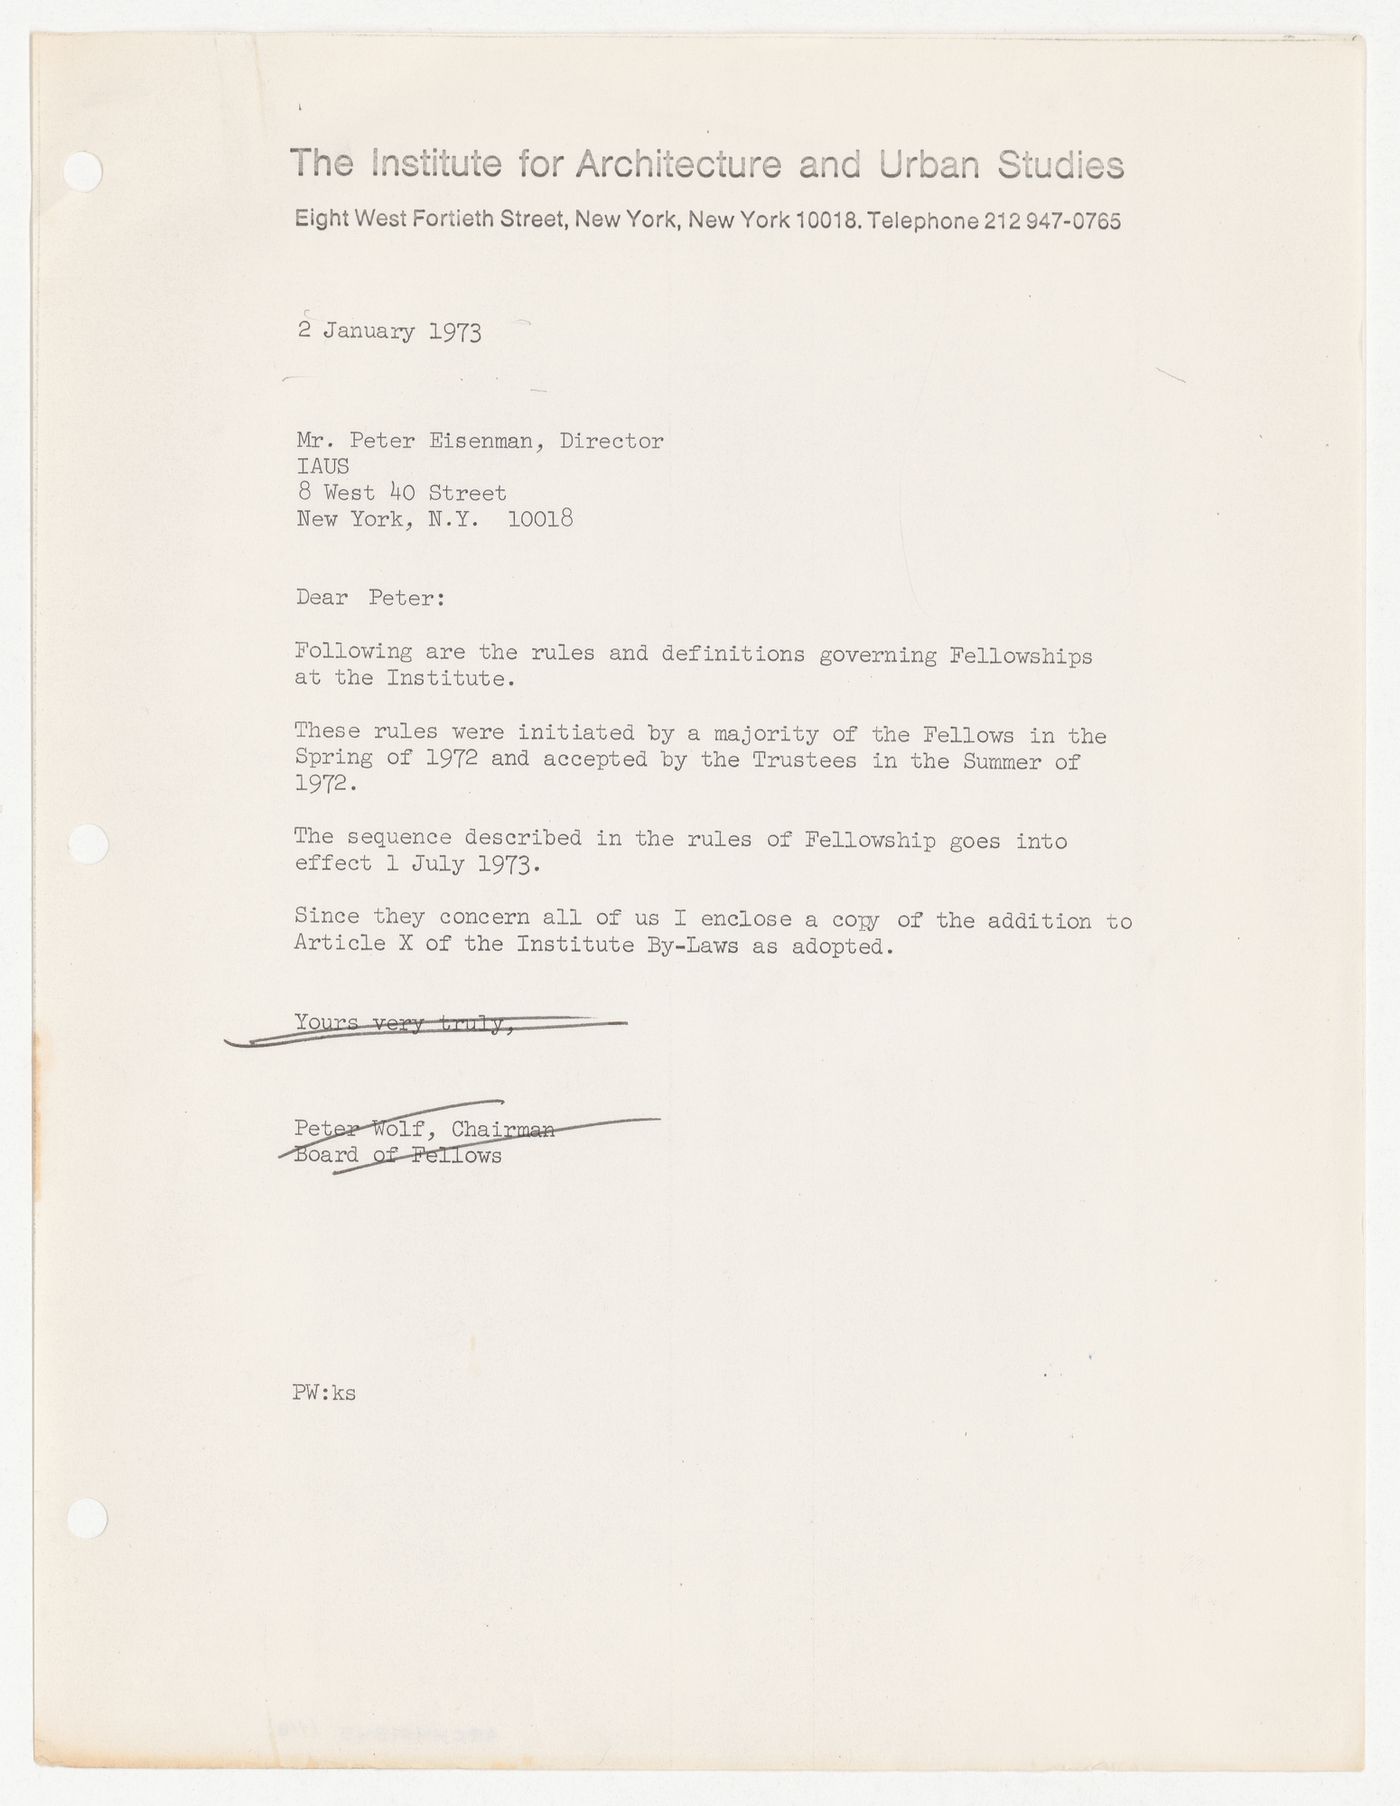 Memorandum from Peter Wolf to Peter D. Eisenman with attached Article X from IAUS Fellowship by-laws dated June 6th, 1972